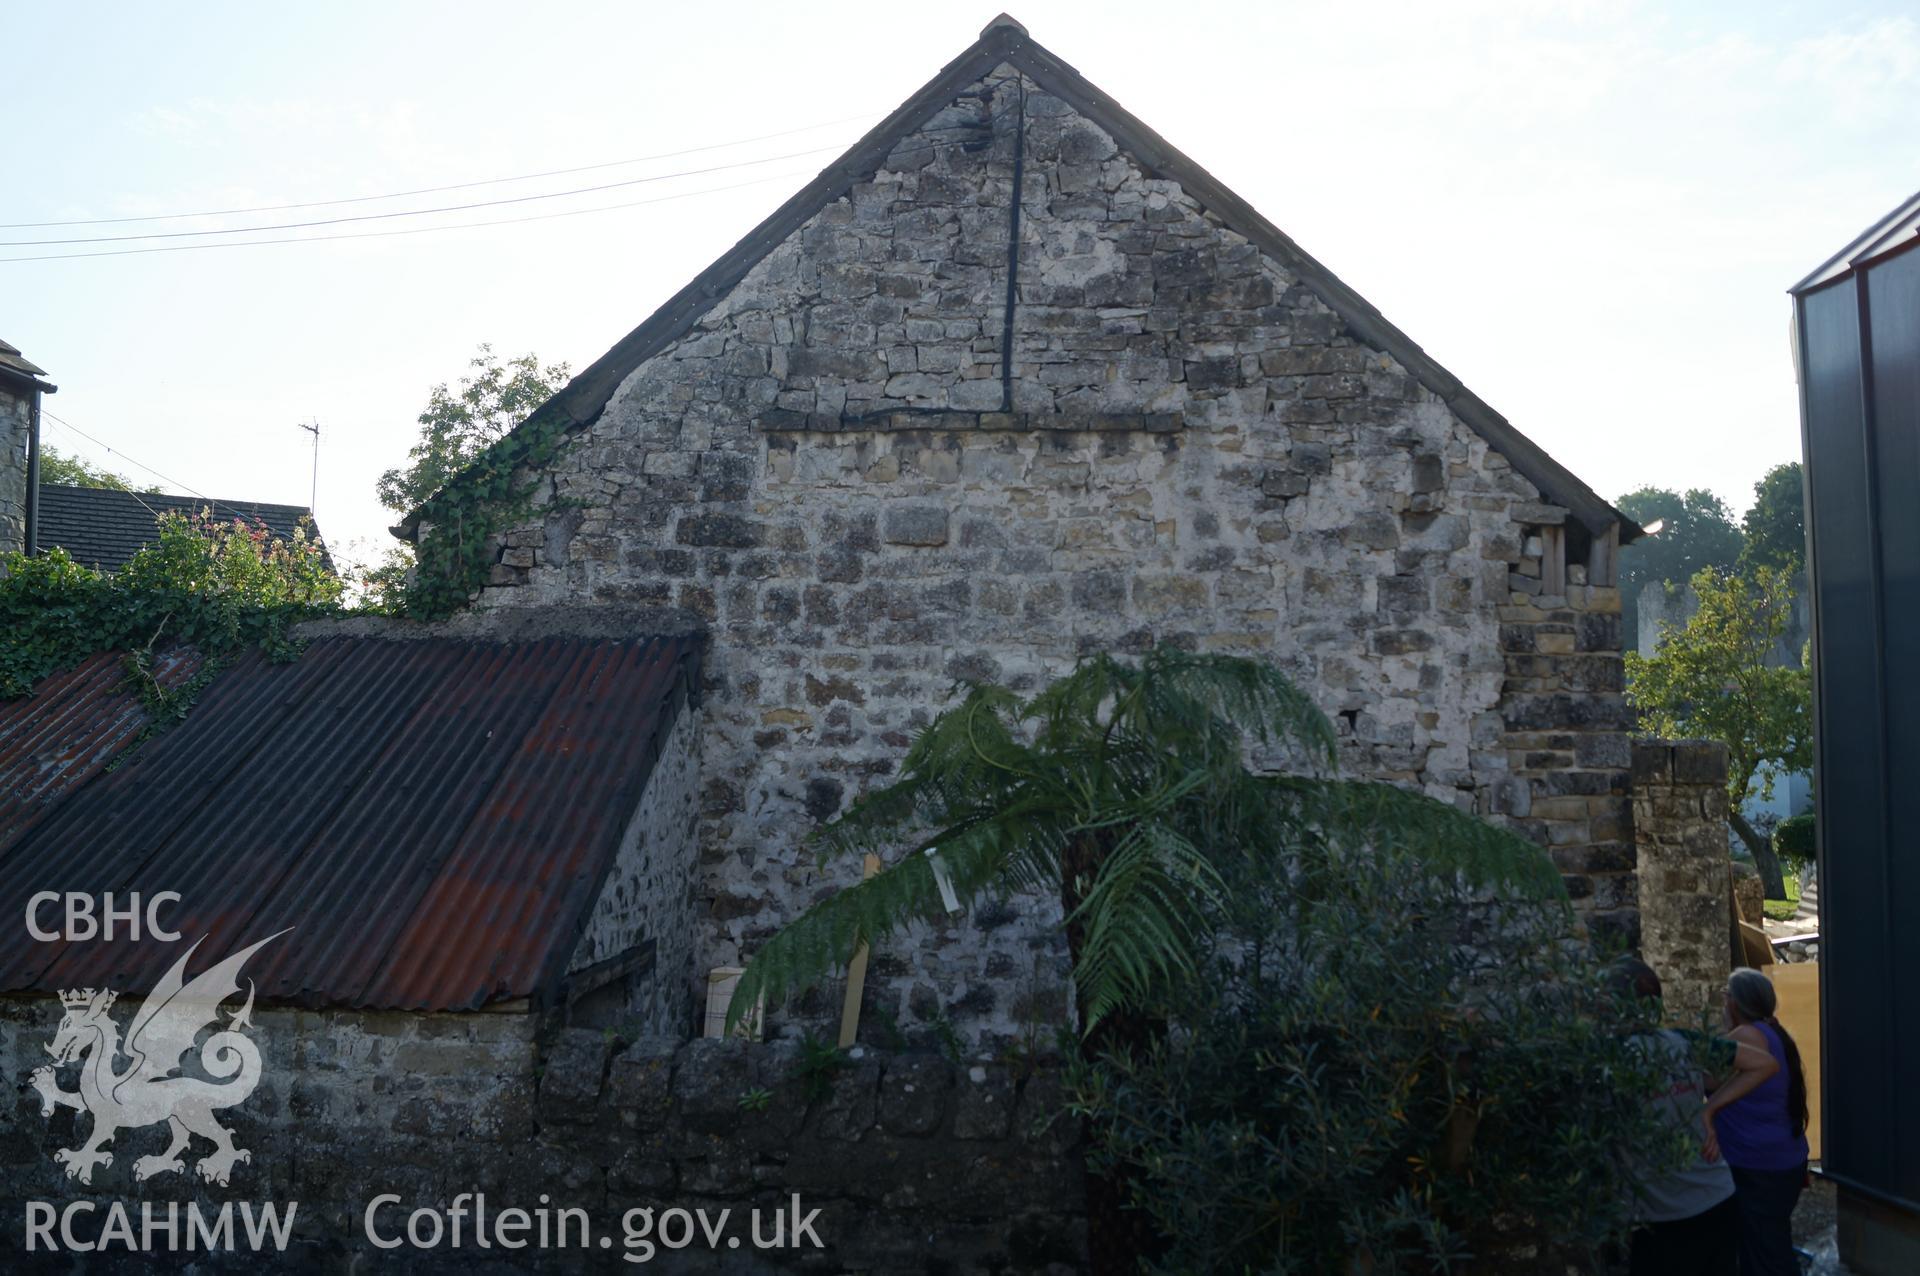 View 'looking west southwest at the eastern gable of the barn with former pigsty and yard in the foreground' at Rowley Court, Llantwit Major. Photograph & description by Jenny Hall & Paul Sambrook of Trysor, 7th September 2016.